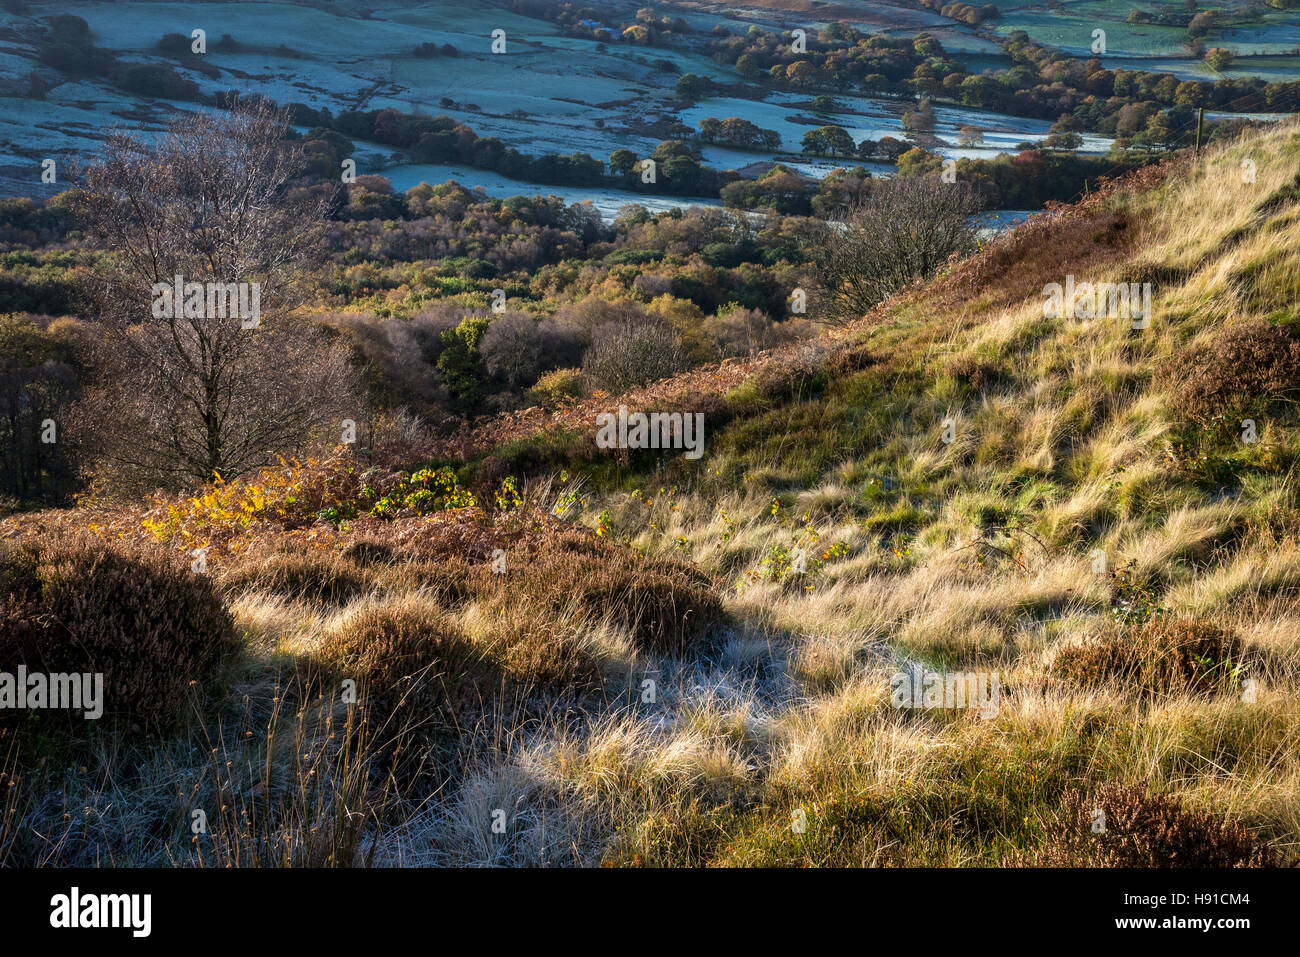 Textures on a hillside in the English countryside on an autumn morning. Stock Photo